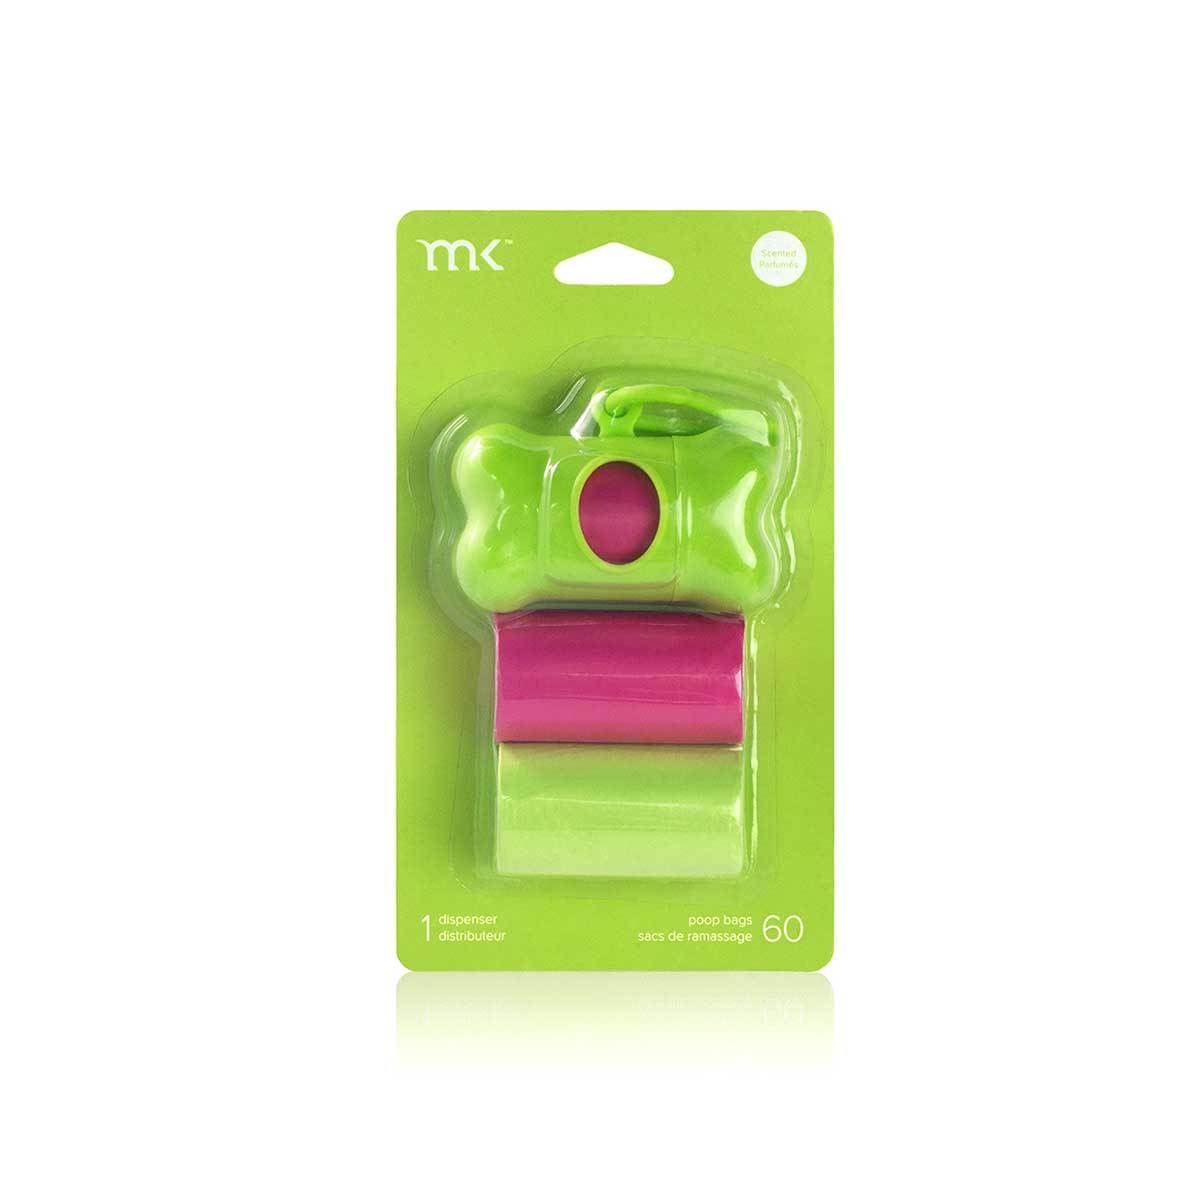 Modern Kanine Dispenser and Waste Bags - Green & Pink | Pawlicious & Company